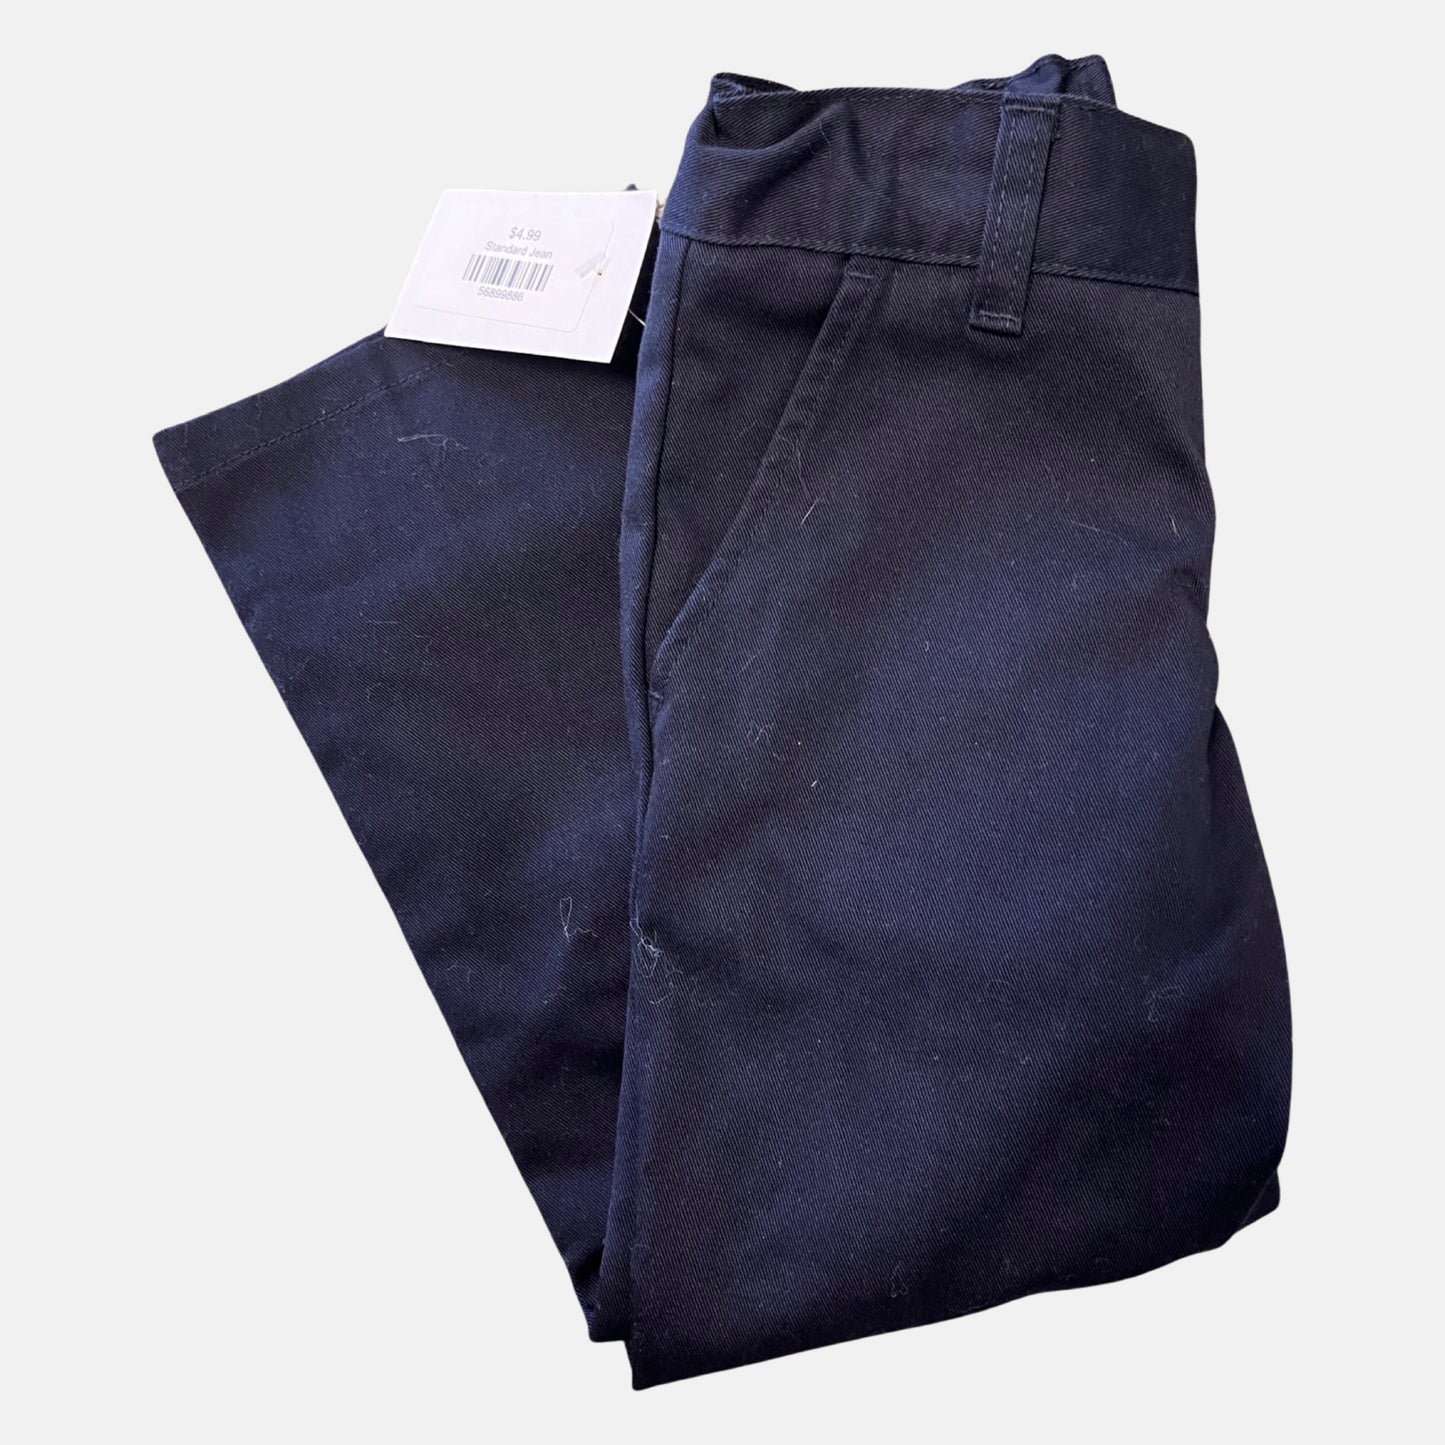 4 French Toast Navy Pants